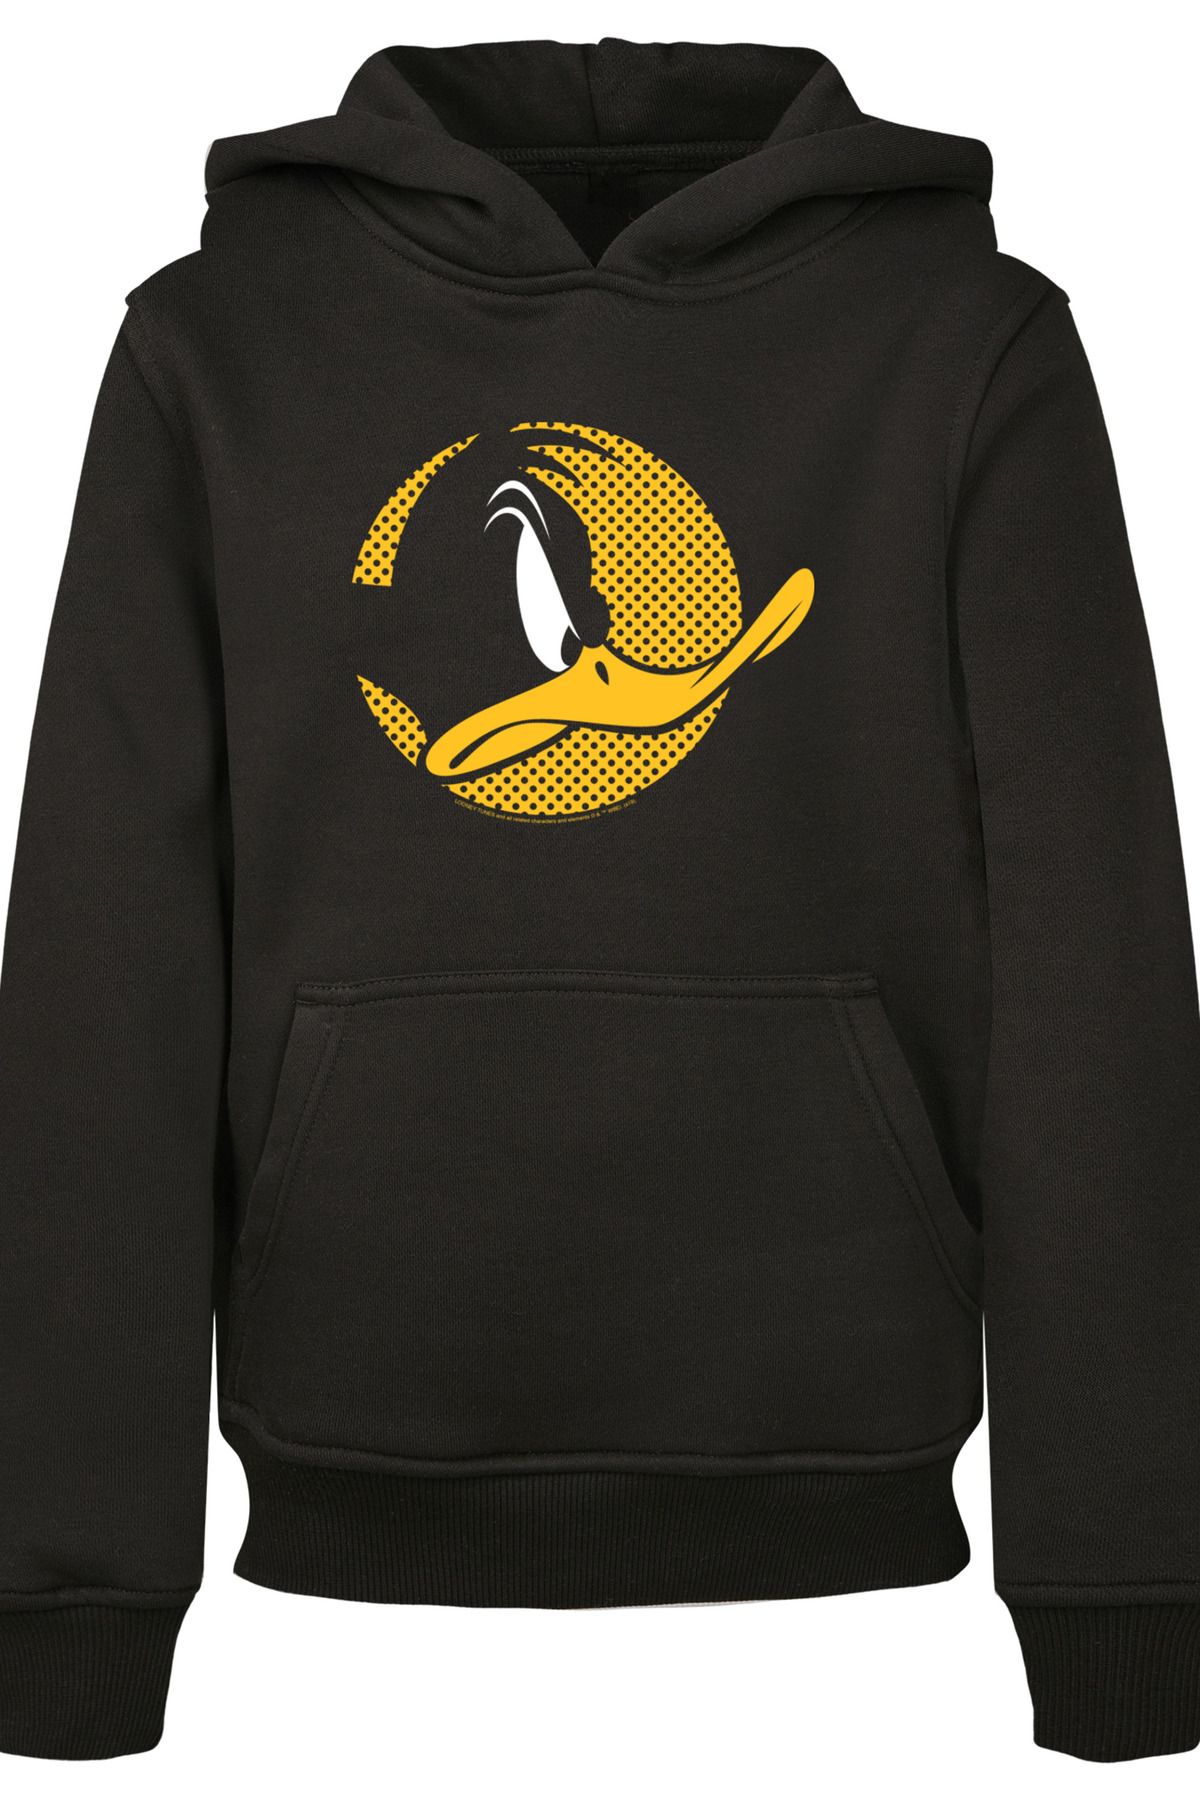 F4NT4STIC Kinder Kids -BLK Hoody Daffy Tunes - Trendyol Dotted mit Looney Basic Duck Profile